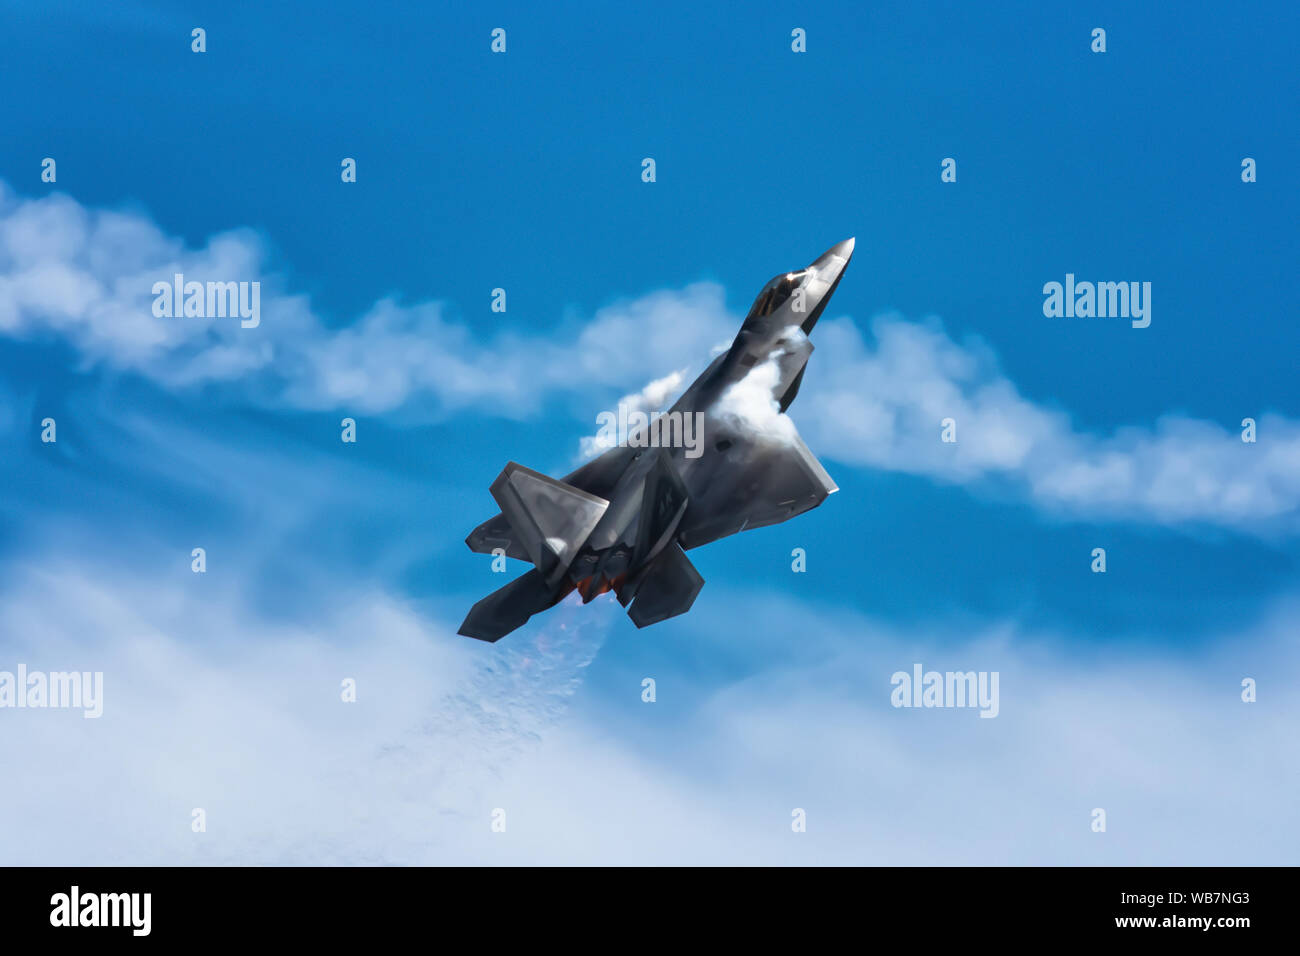 F-22 Raptor air superiority maneuvers demonstrated at Travis Air Force Base. Stock Photo